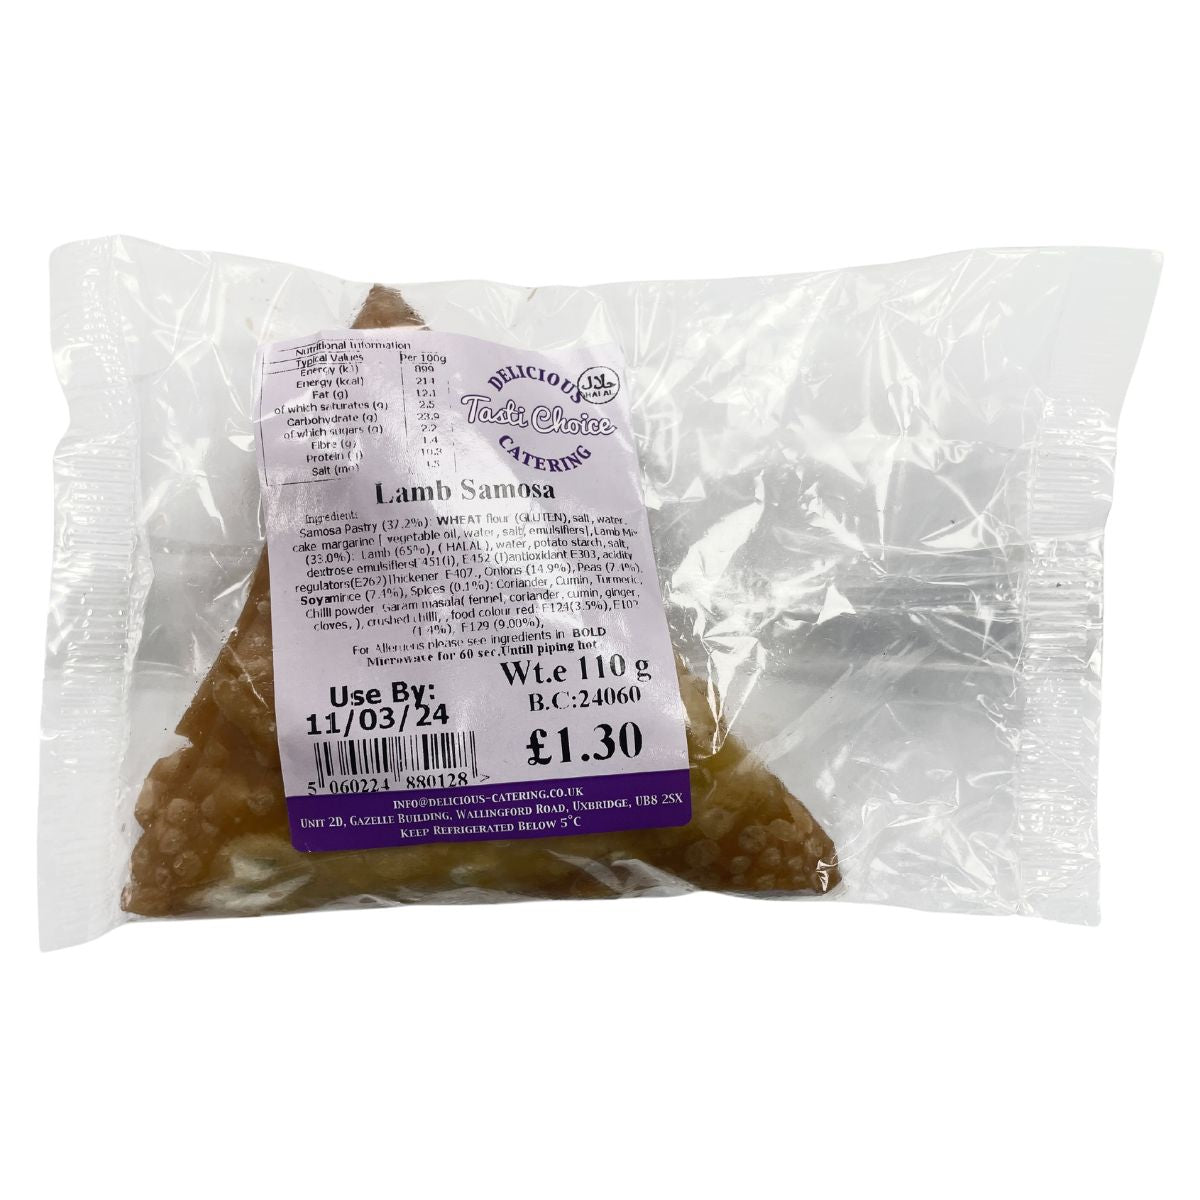 A Delicious Catering - Tasti Choice Lamb Samosa in a bag on a white background.